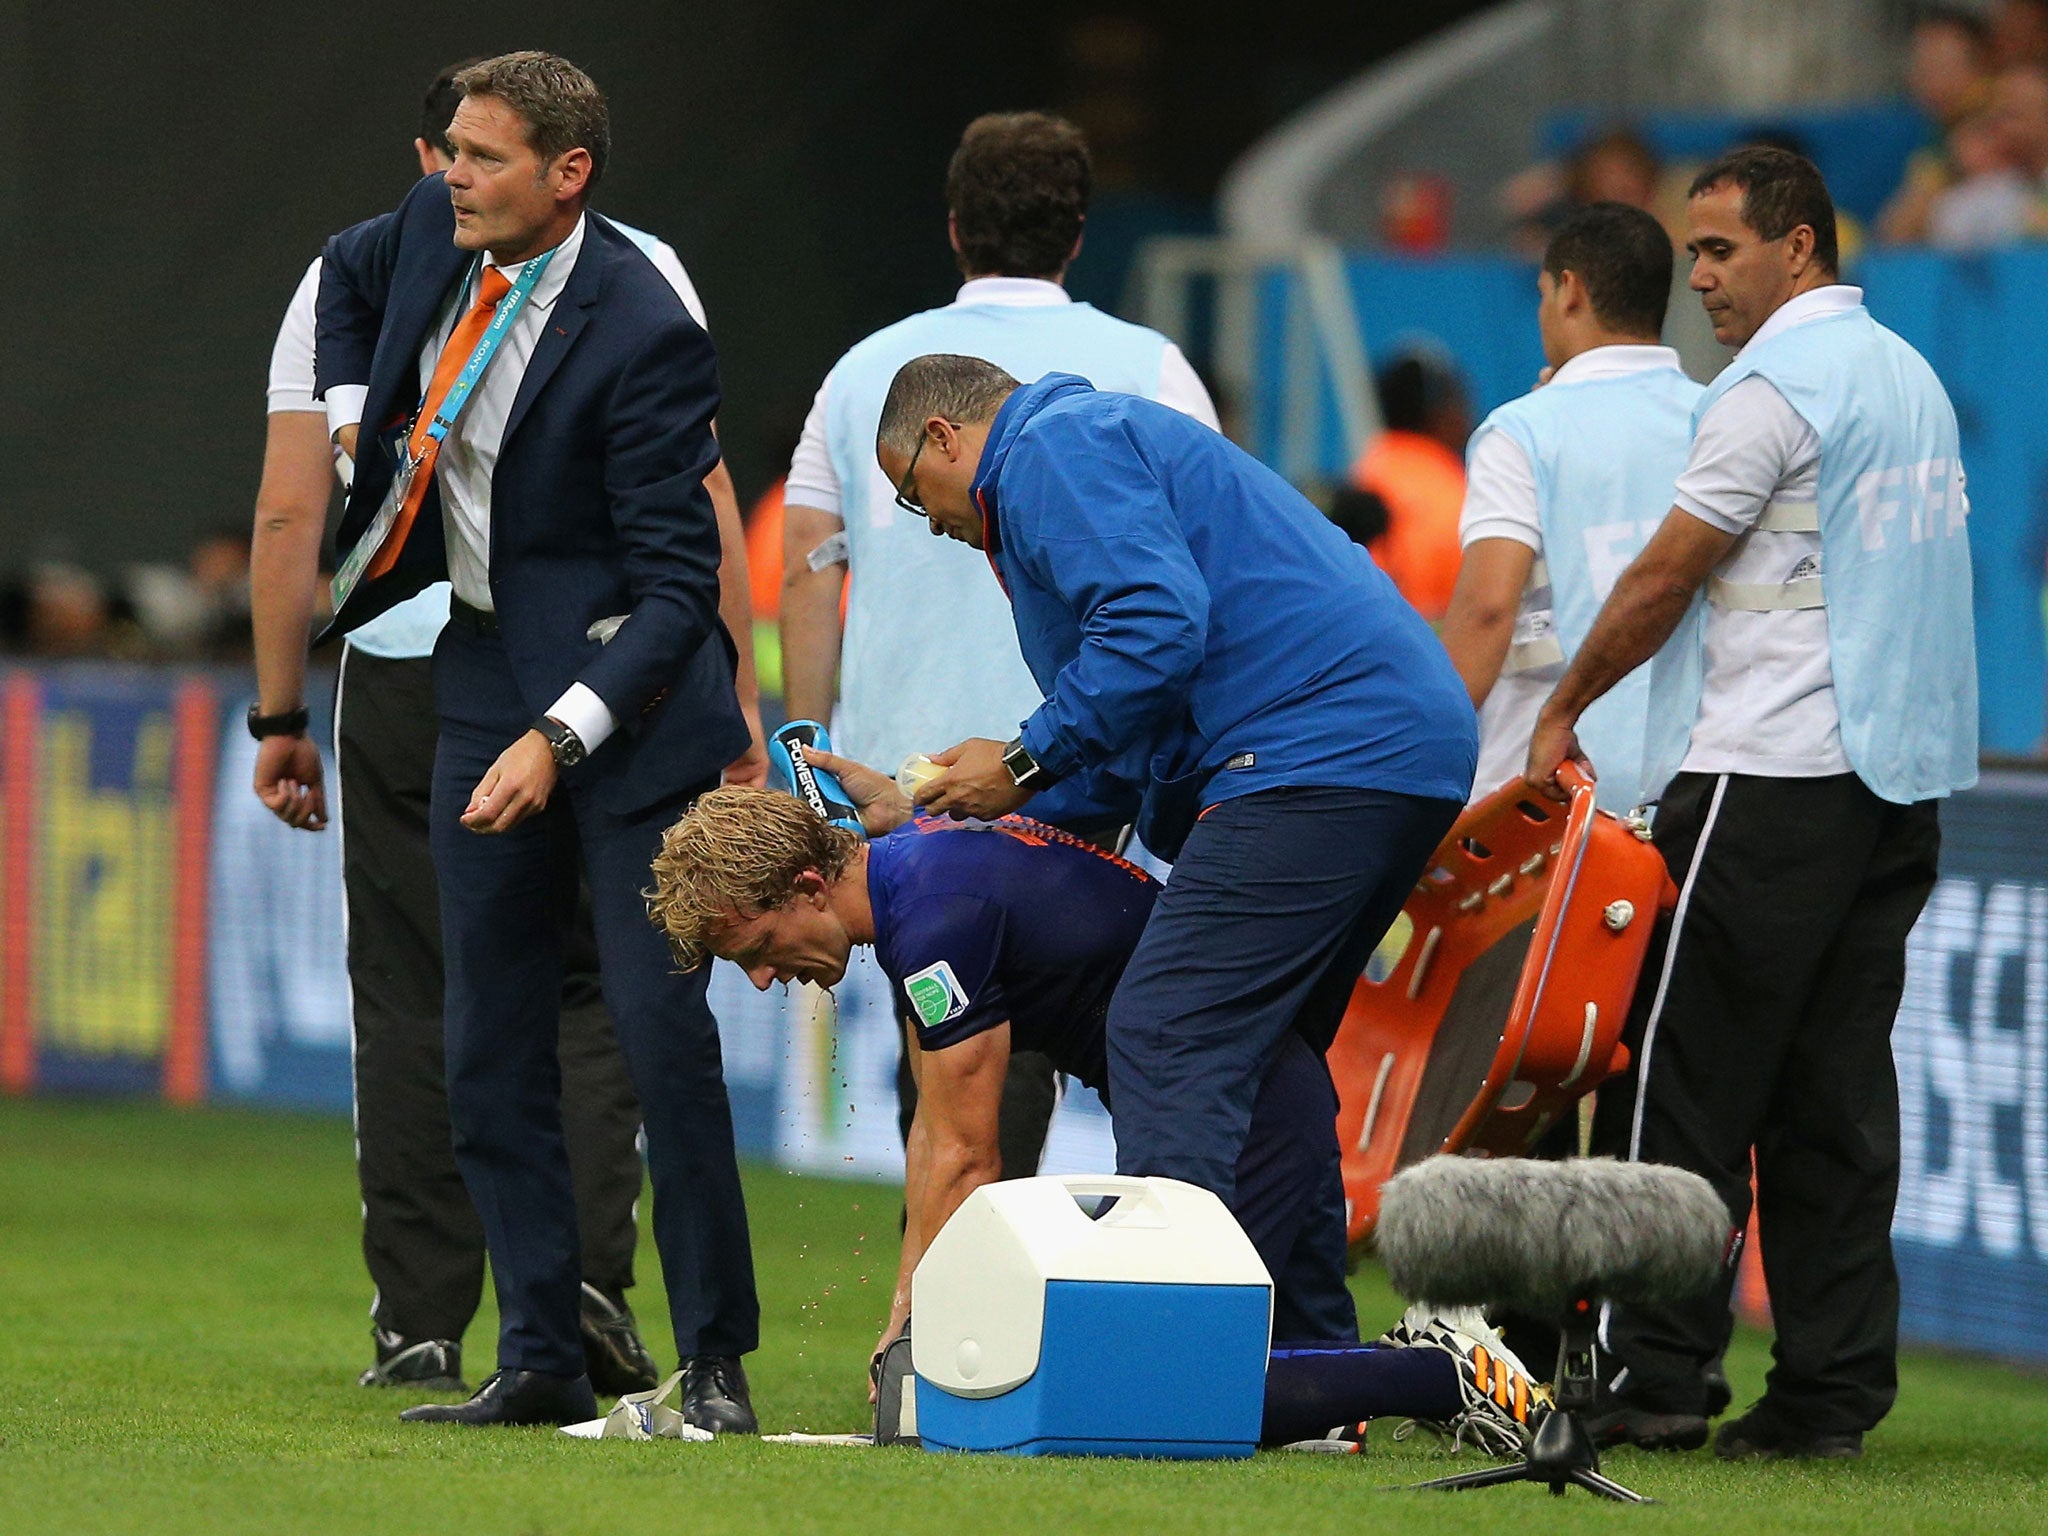 Dirk Kuyt of the Netherlands receives treatment after a clash